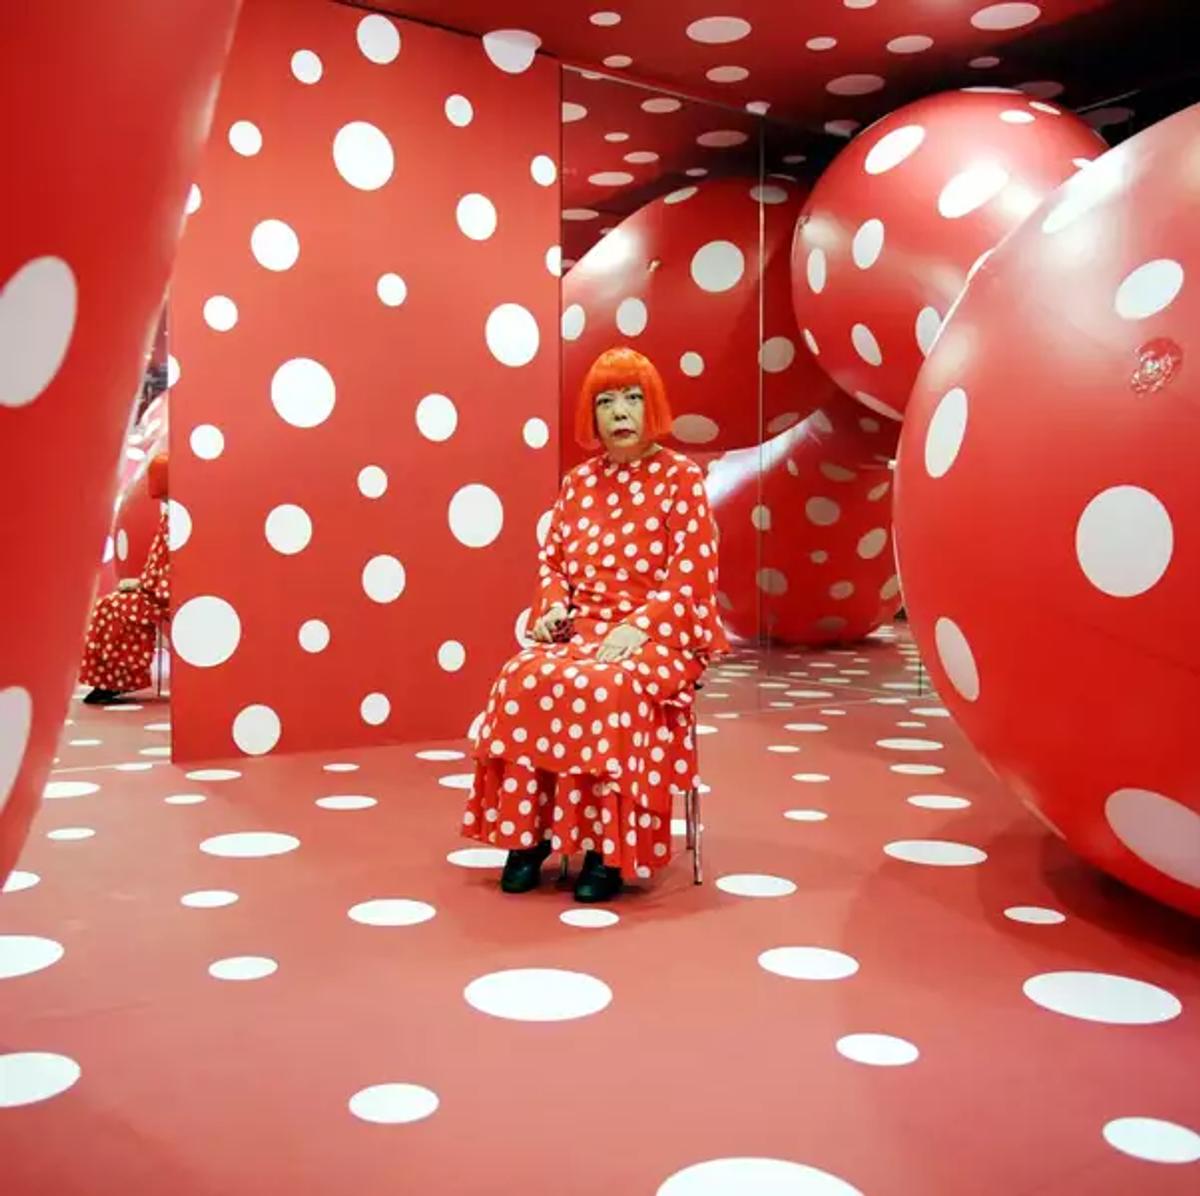 How Yayoi Kusama, Obsessed with Polka Dots, Became One of the Most